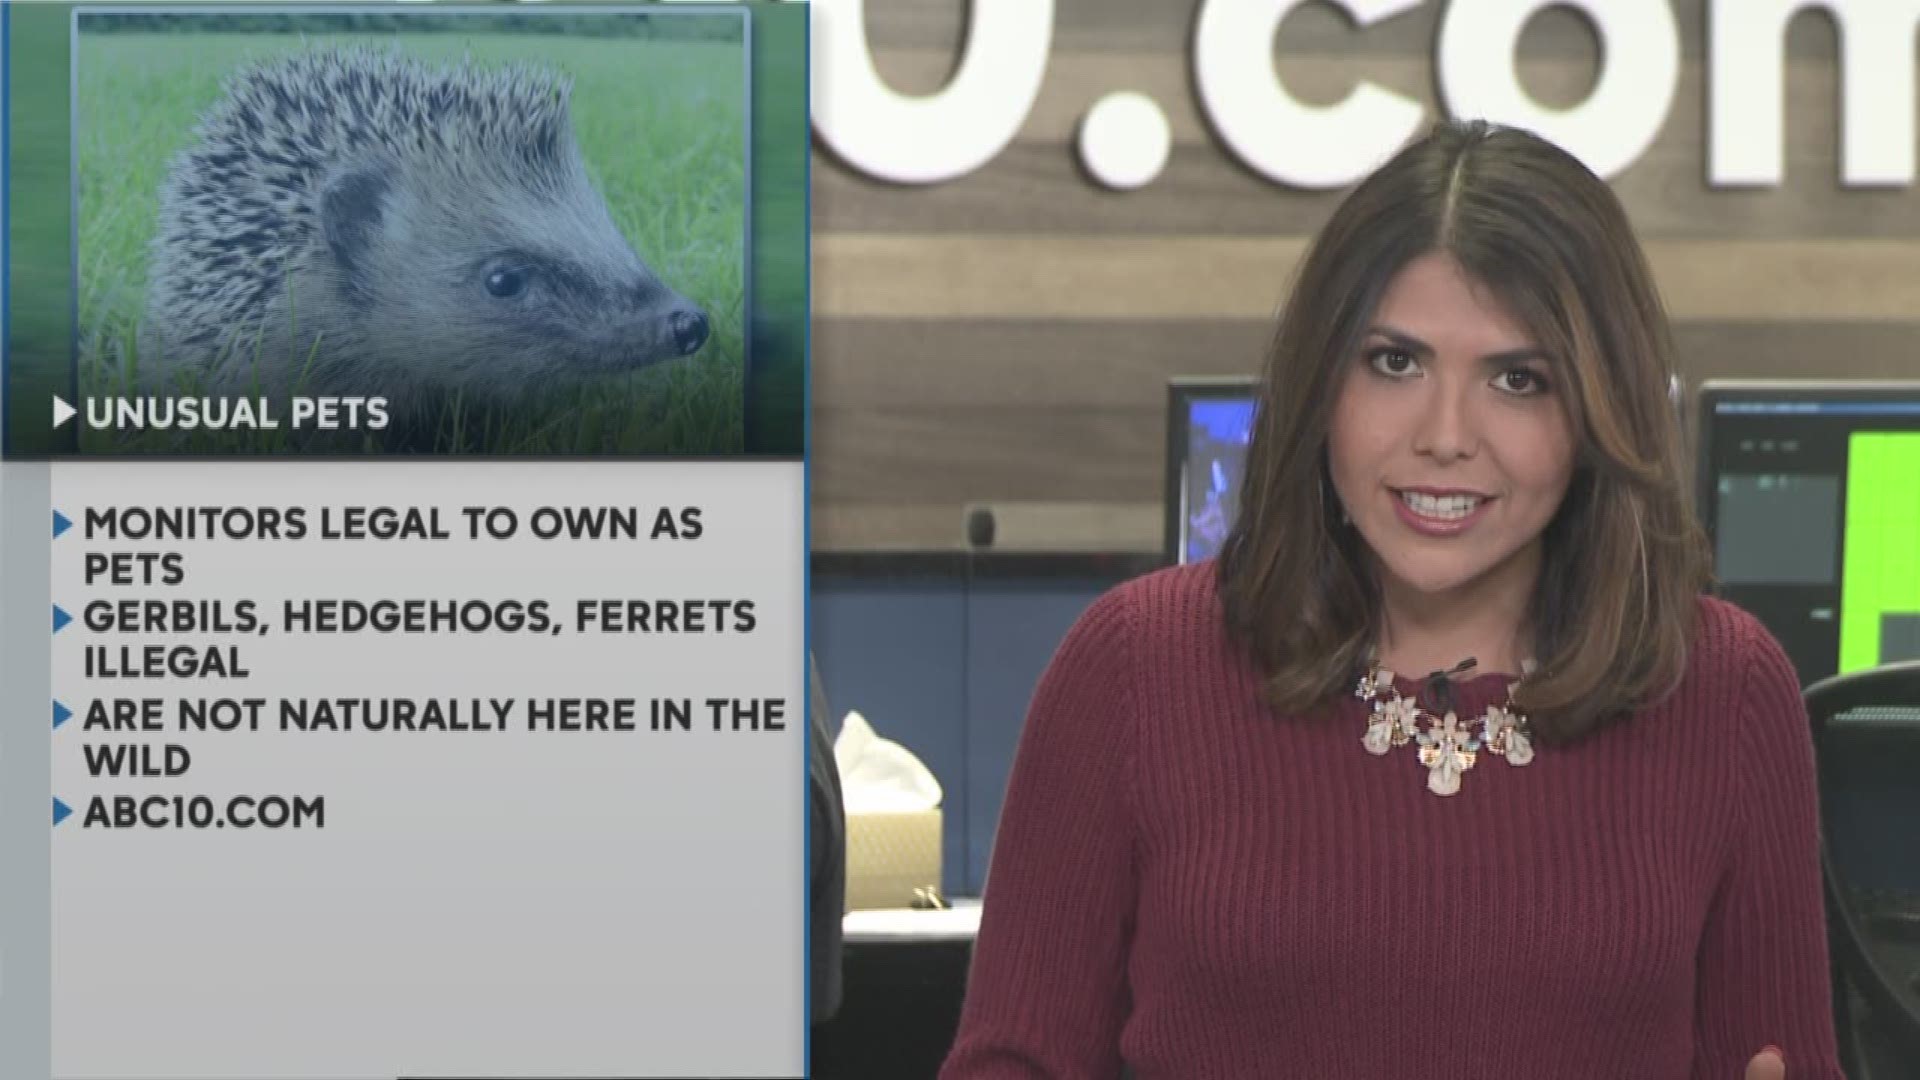 A giant monitor might be an unusual pet choice, but these mild-tempered lizards are totally legal in California. Hedgehogs? Not so much (April 11, 2017)